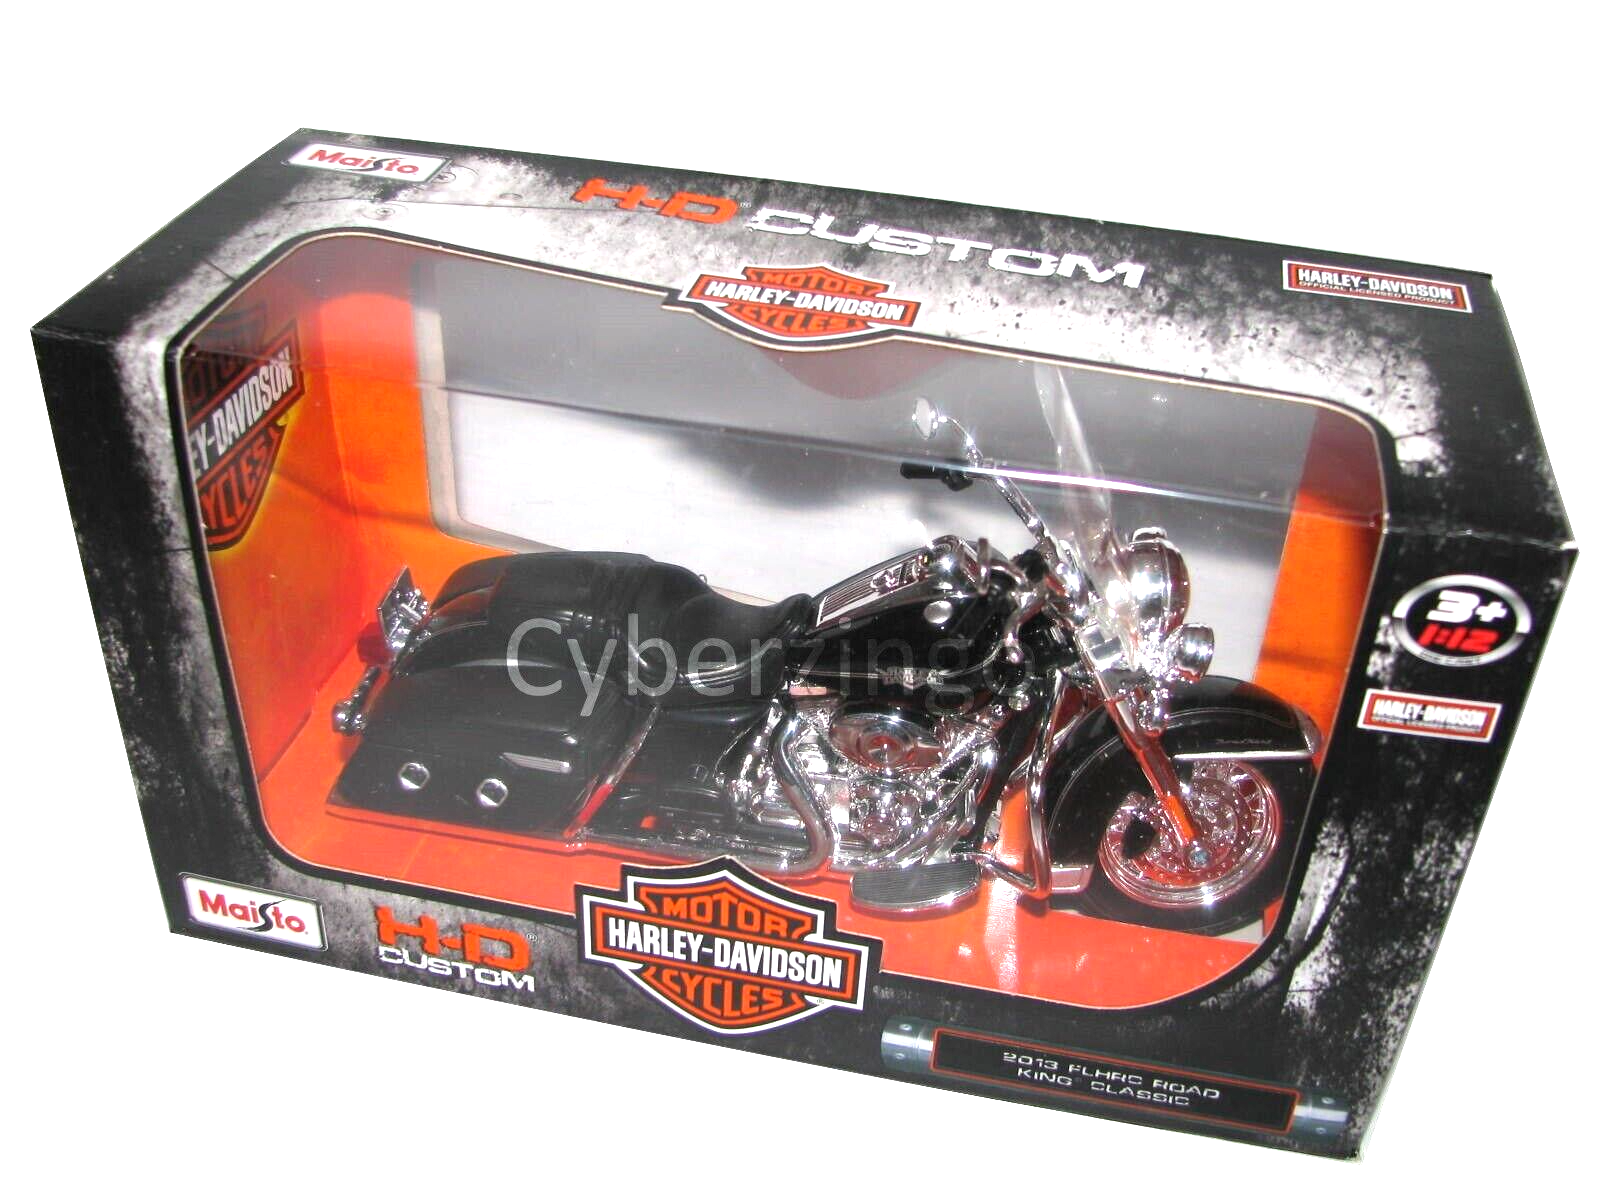 Maisto 1:12 Harley Davidson 2013 FLHRC Road King Classic Motorcycle Model NEW - $18.98